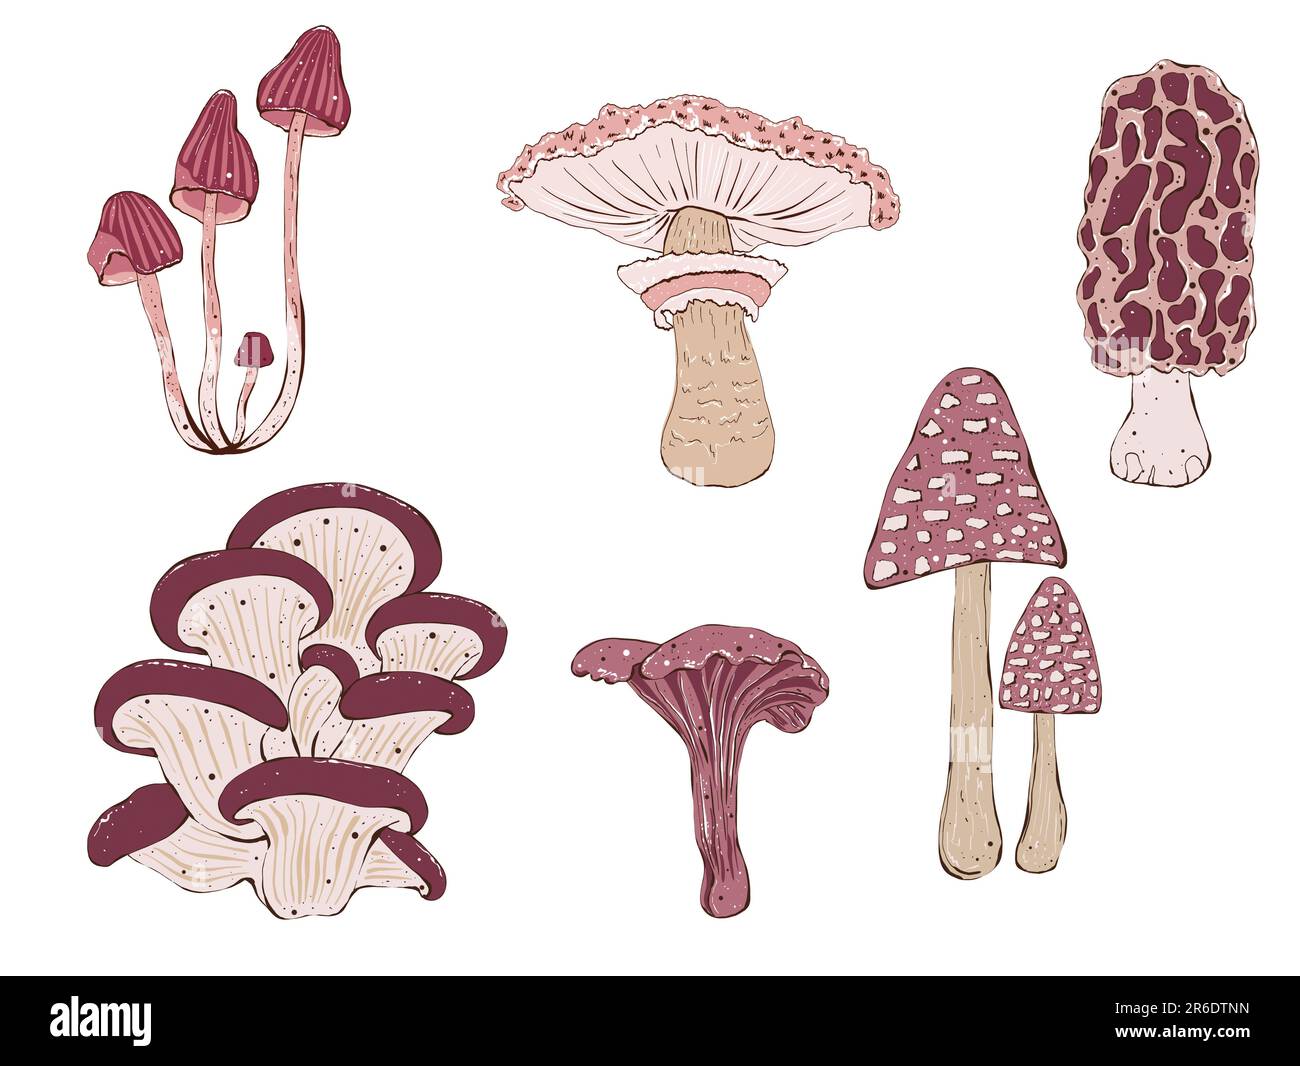 Set of mushrooms illustrations. Hand drawing illustration in cartoon style isolated on white Stock Photo